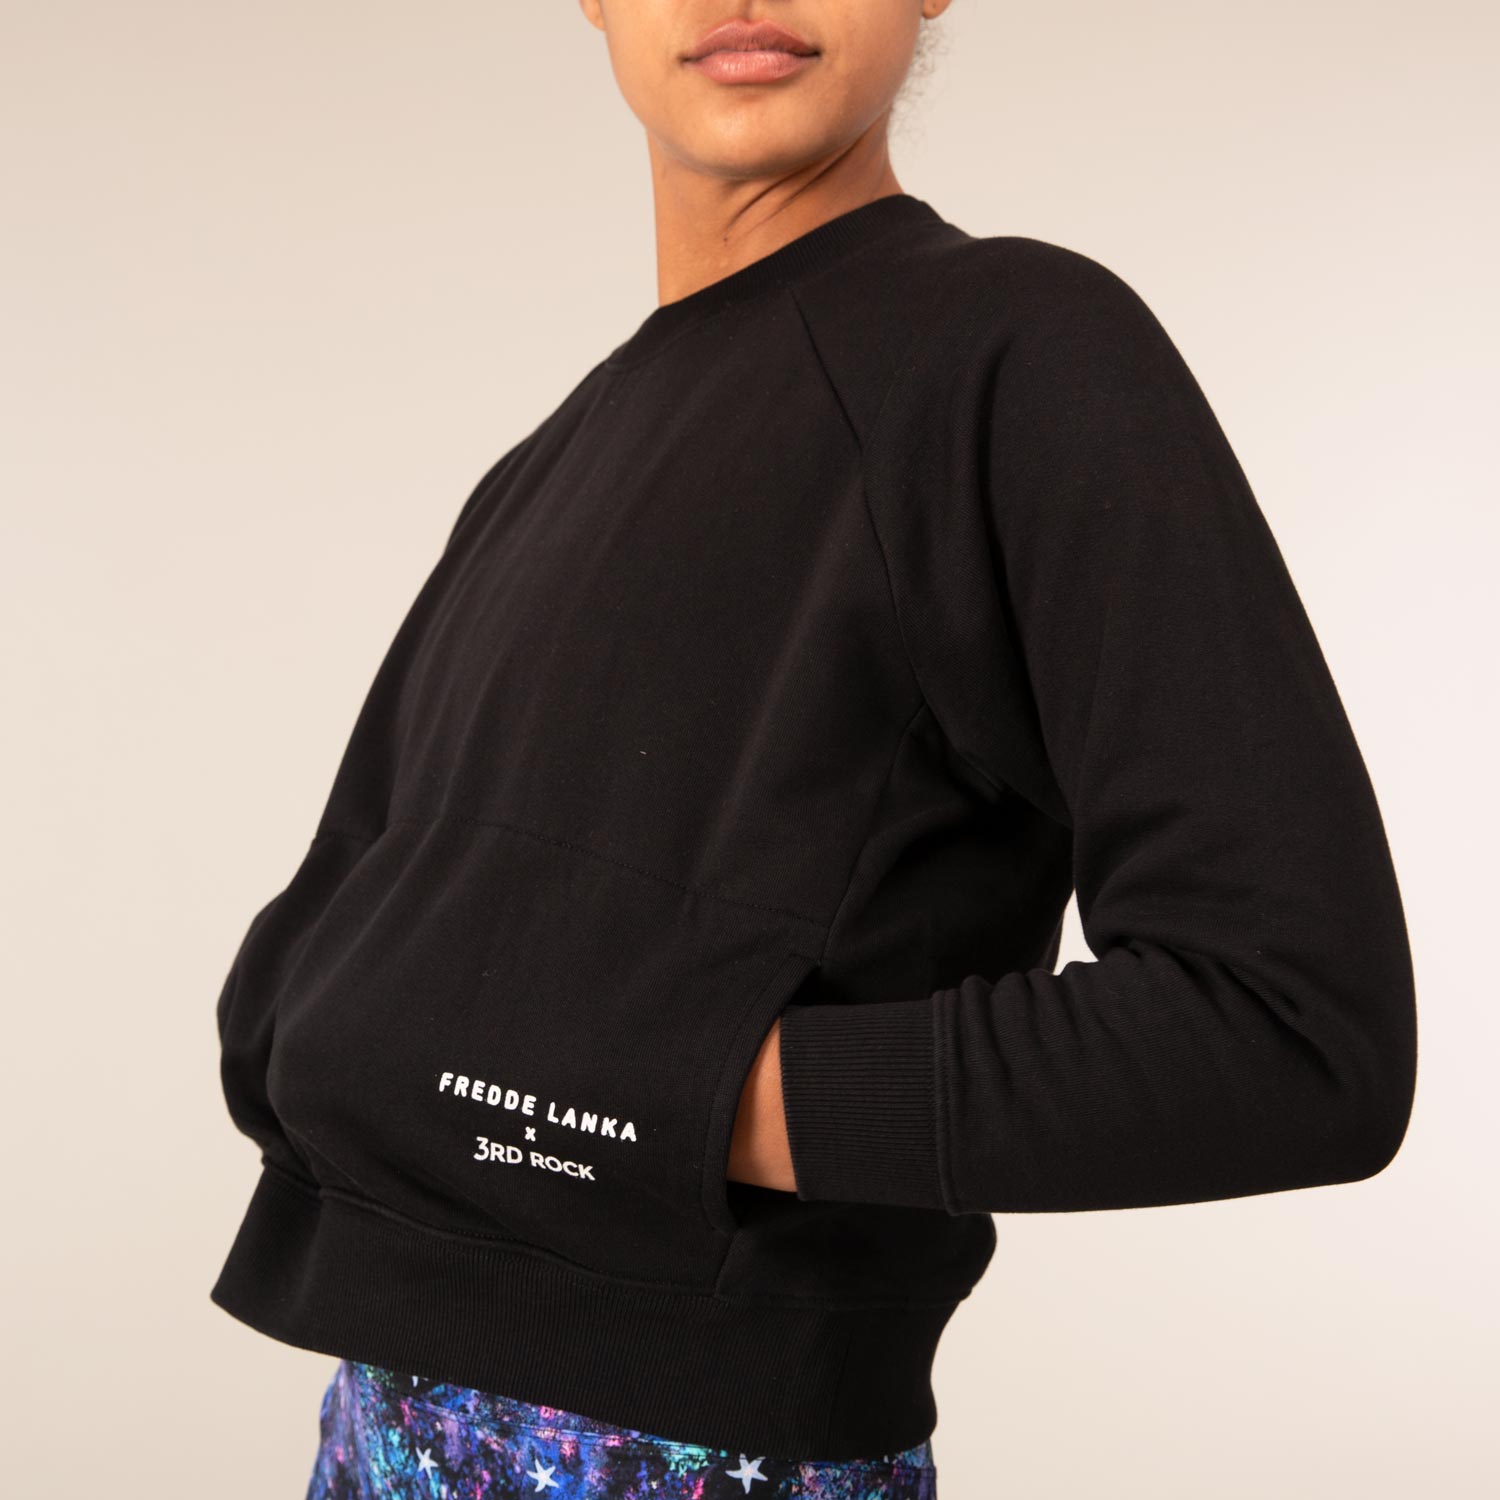 Fredde Lanka x 3RD ROCK | Cropped Organic Cotton Sweat -  Kendal is 5ft 8 with a 36" bust and wears a size M F